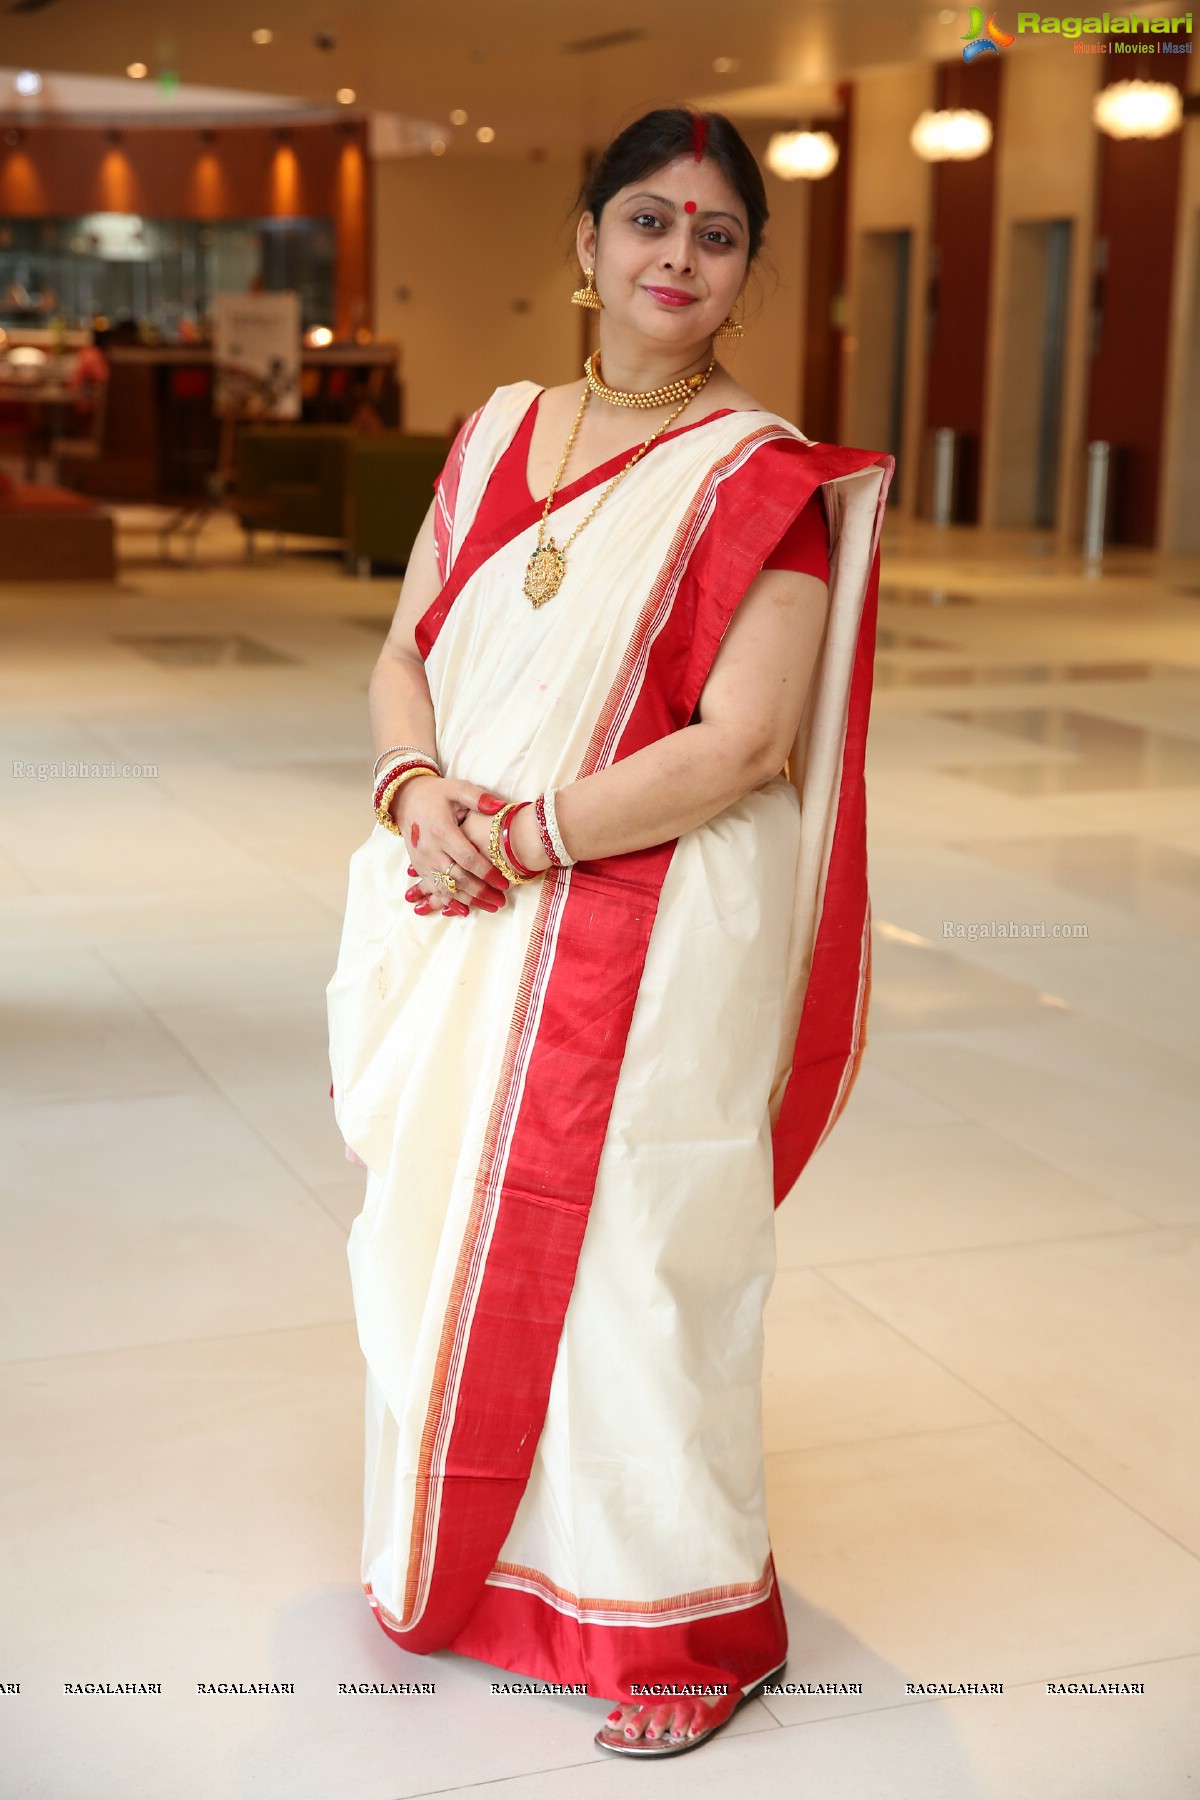 Samanvay Change of Guard-Installation of New Committee at Hyatt Place